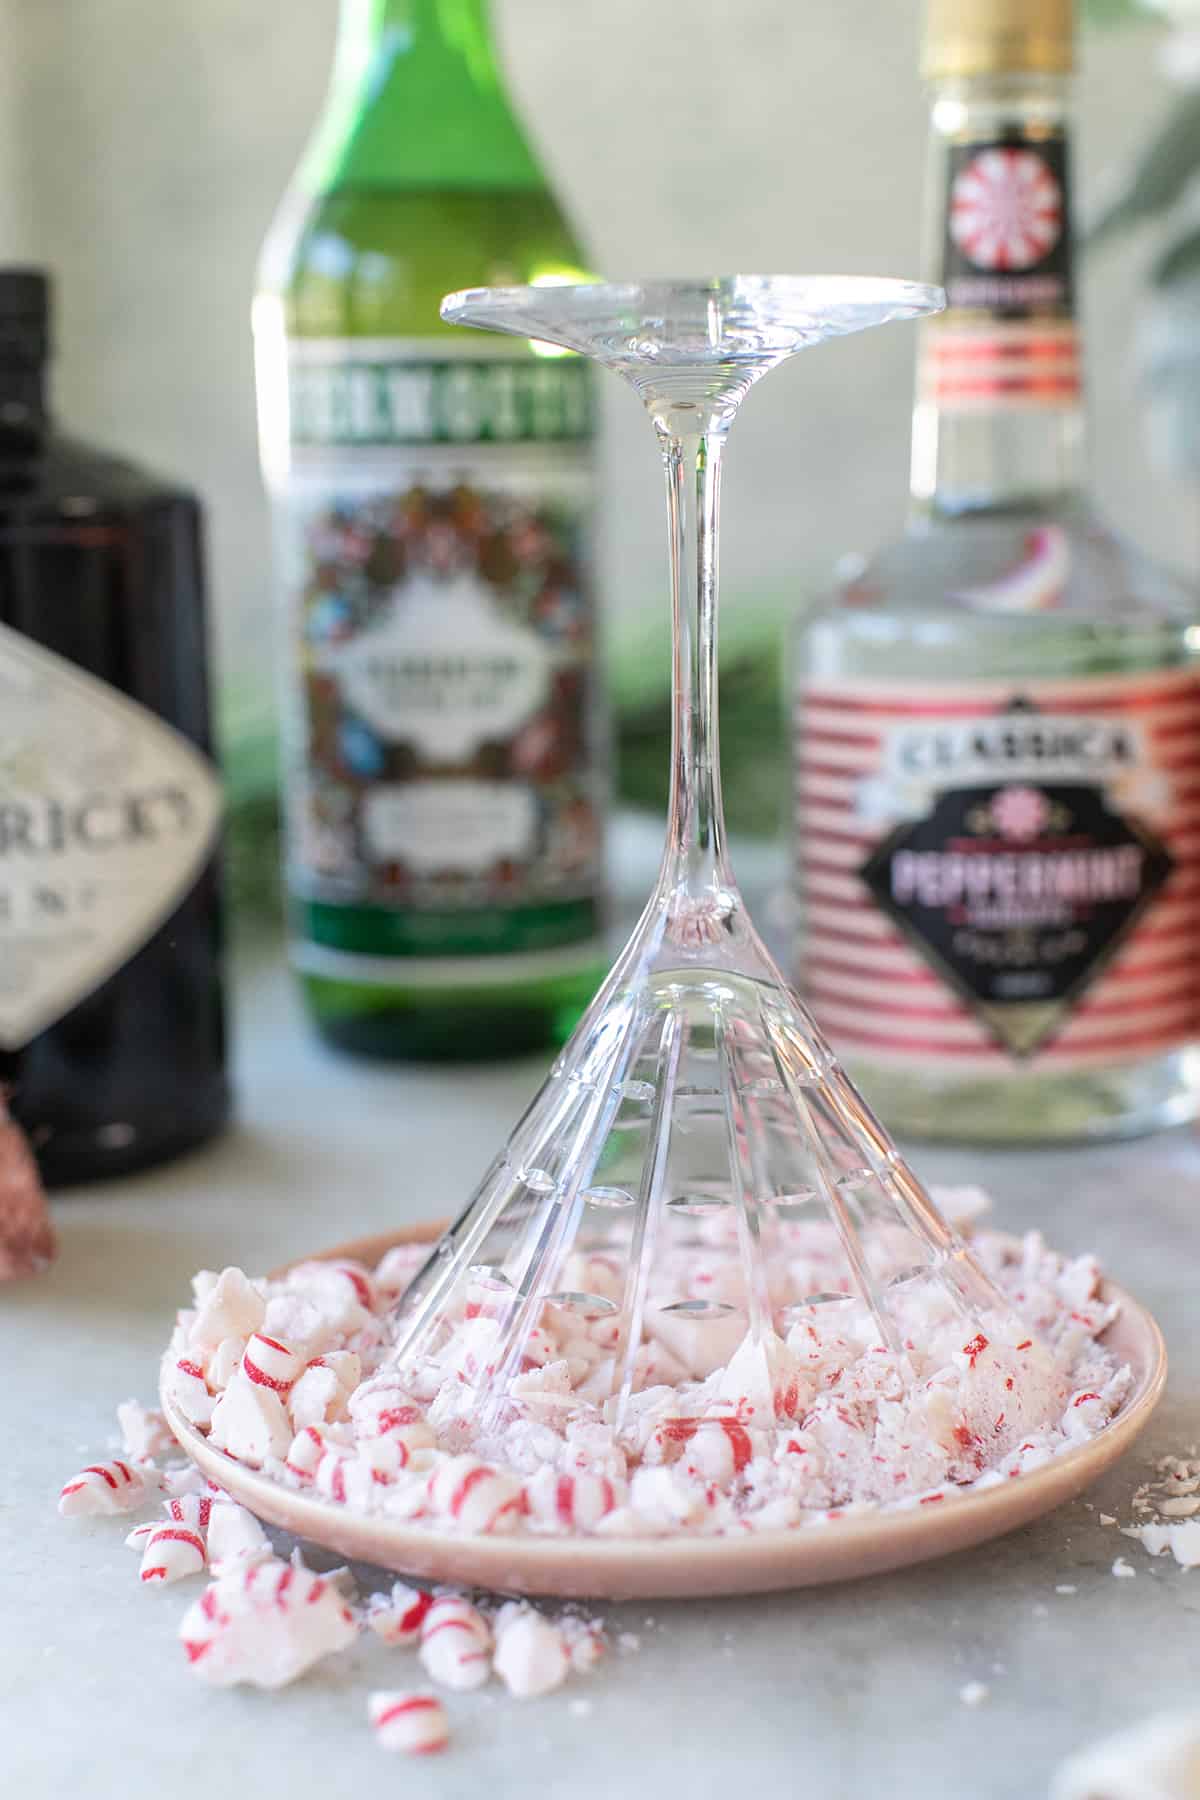 riming a martini glass glass with crushed candy canes - chocolate peppermint martini, crushed peppermint, peppermint candies.